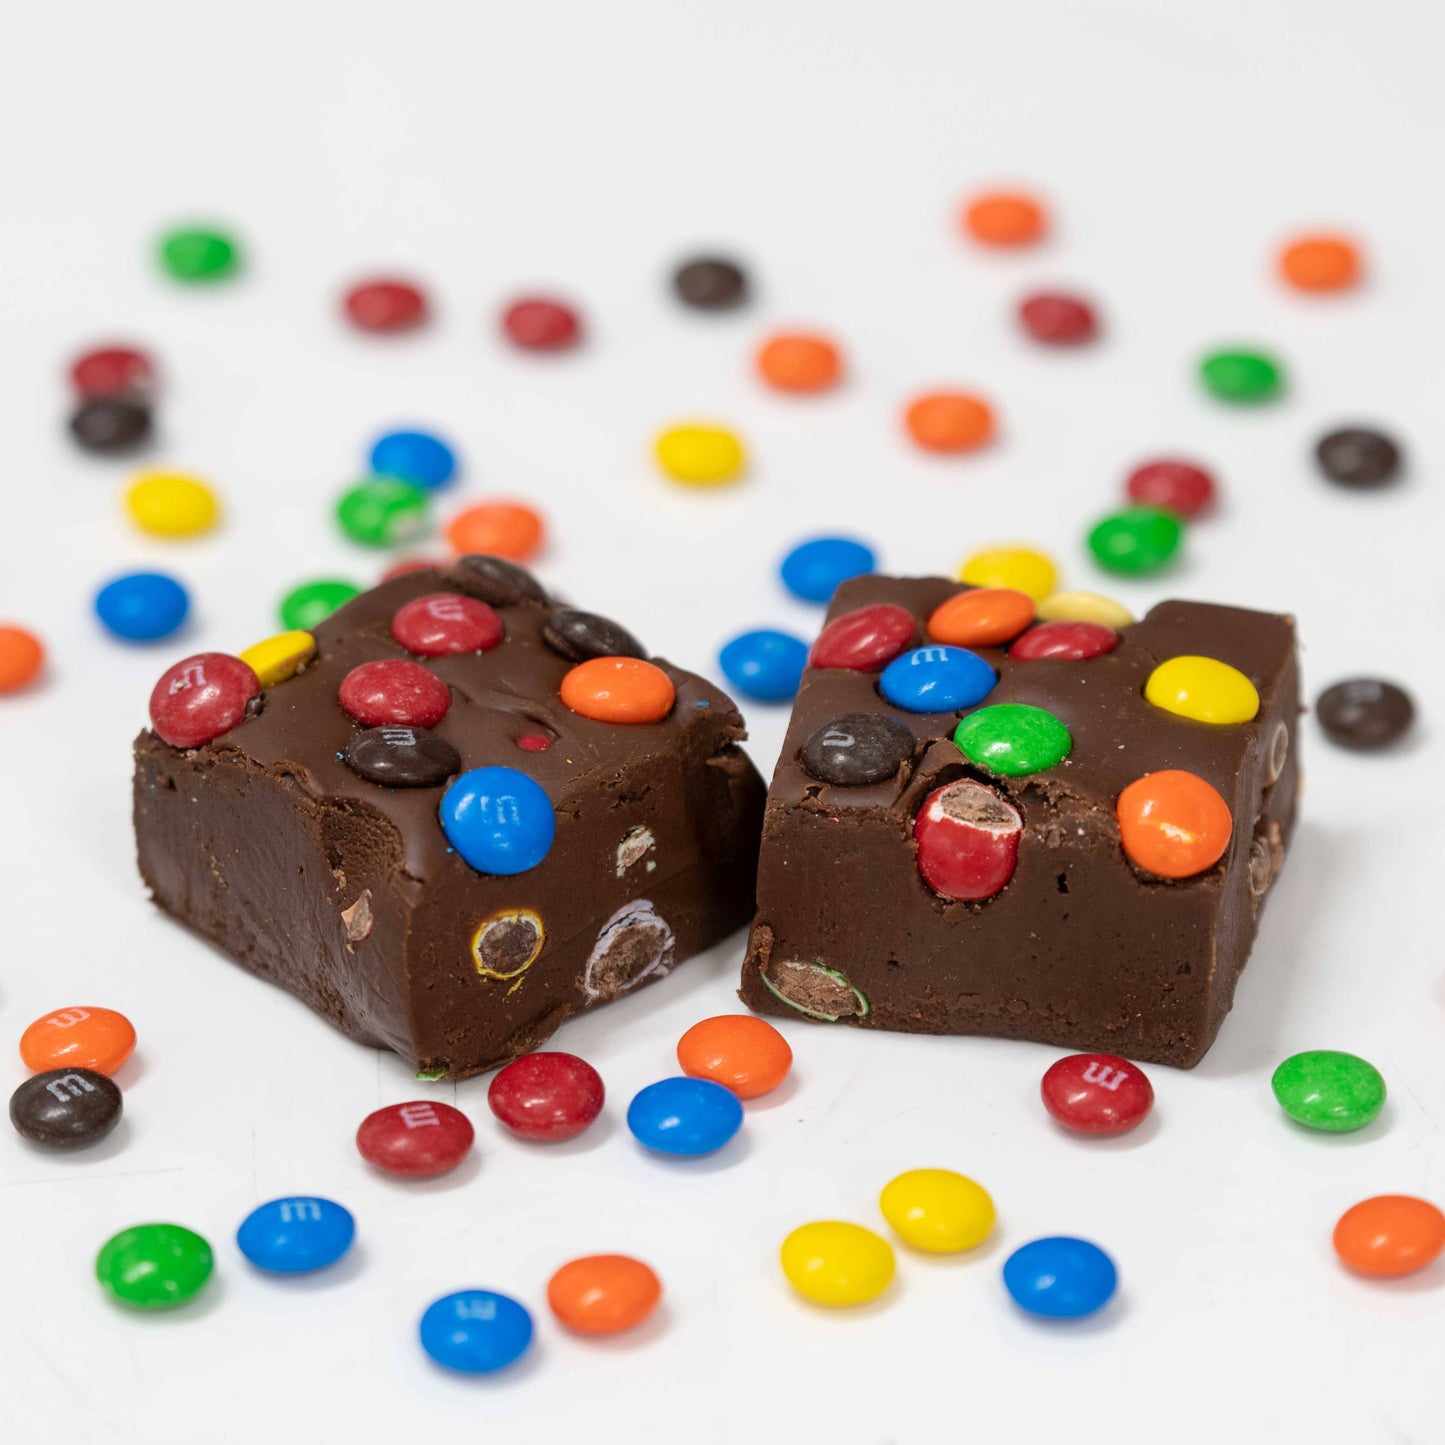 Valley Fudge & Candy - Chocolate Fudge with M&M's (1/2 lb Package)